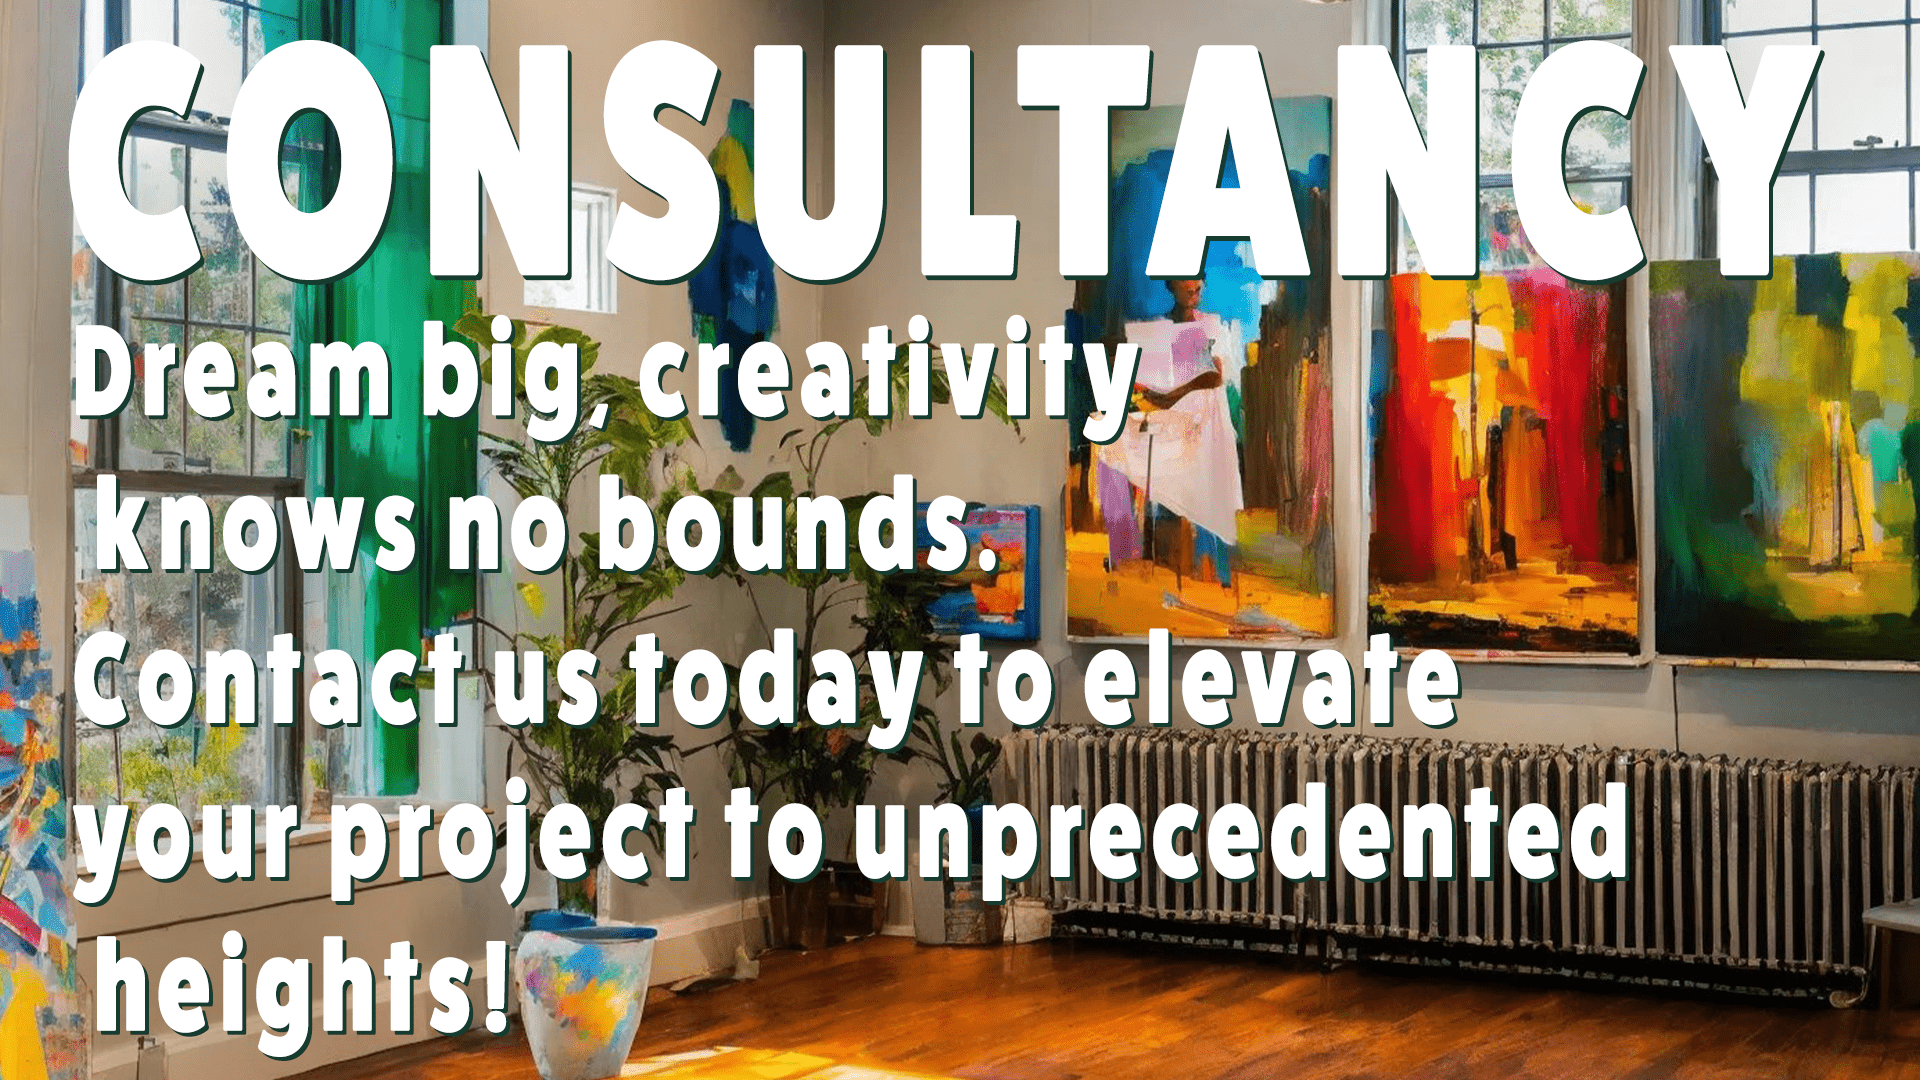 Dream big, creativity knows no bounds at Mark Ruffin Studio™. Contact us today to elevate your project to unprecedented heights!